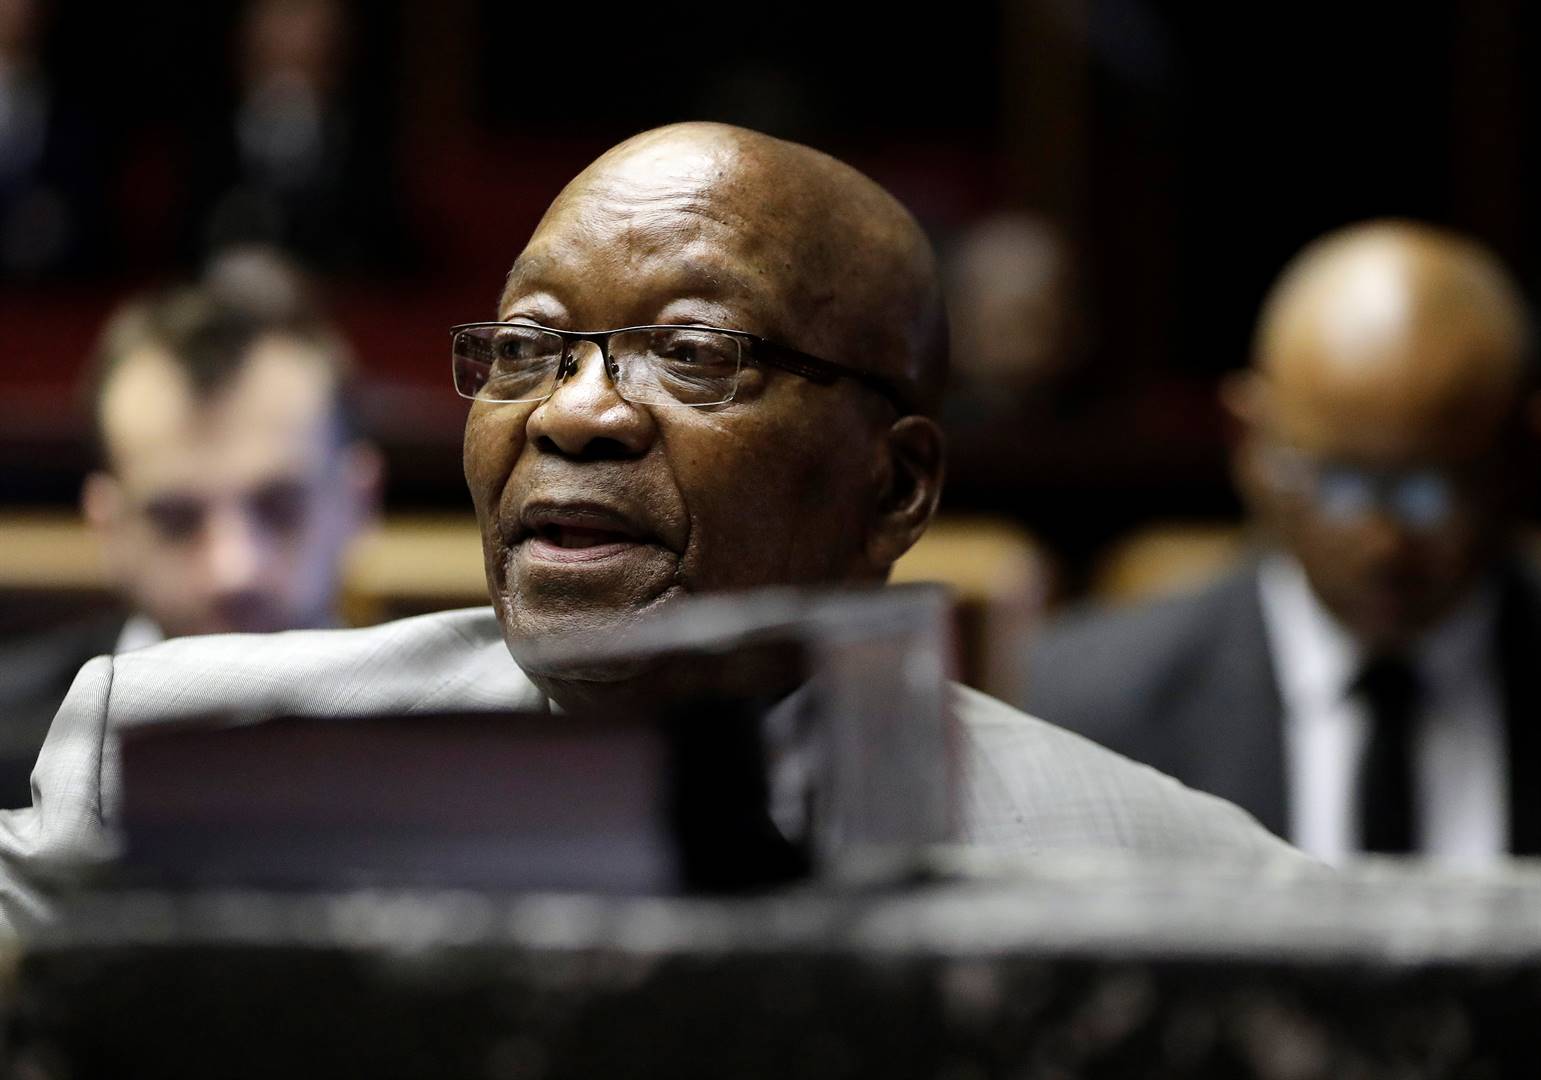 Jacob Zuma is facing charges that include fraud, corruption and racketeering. Picture: Themba Hadebe/Reuters